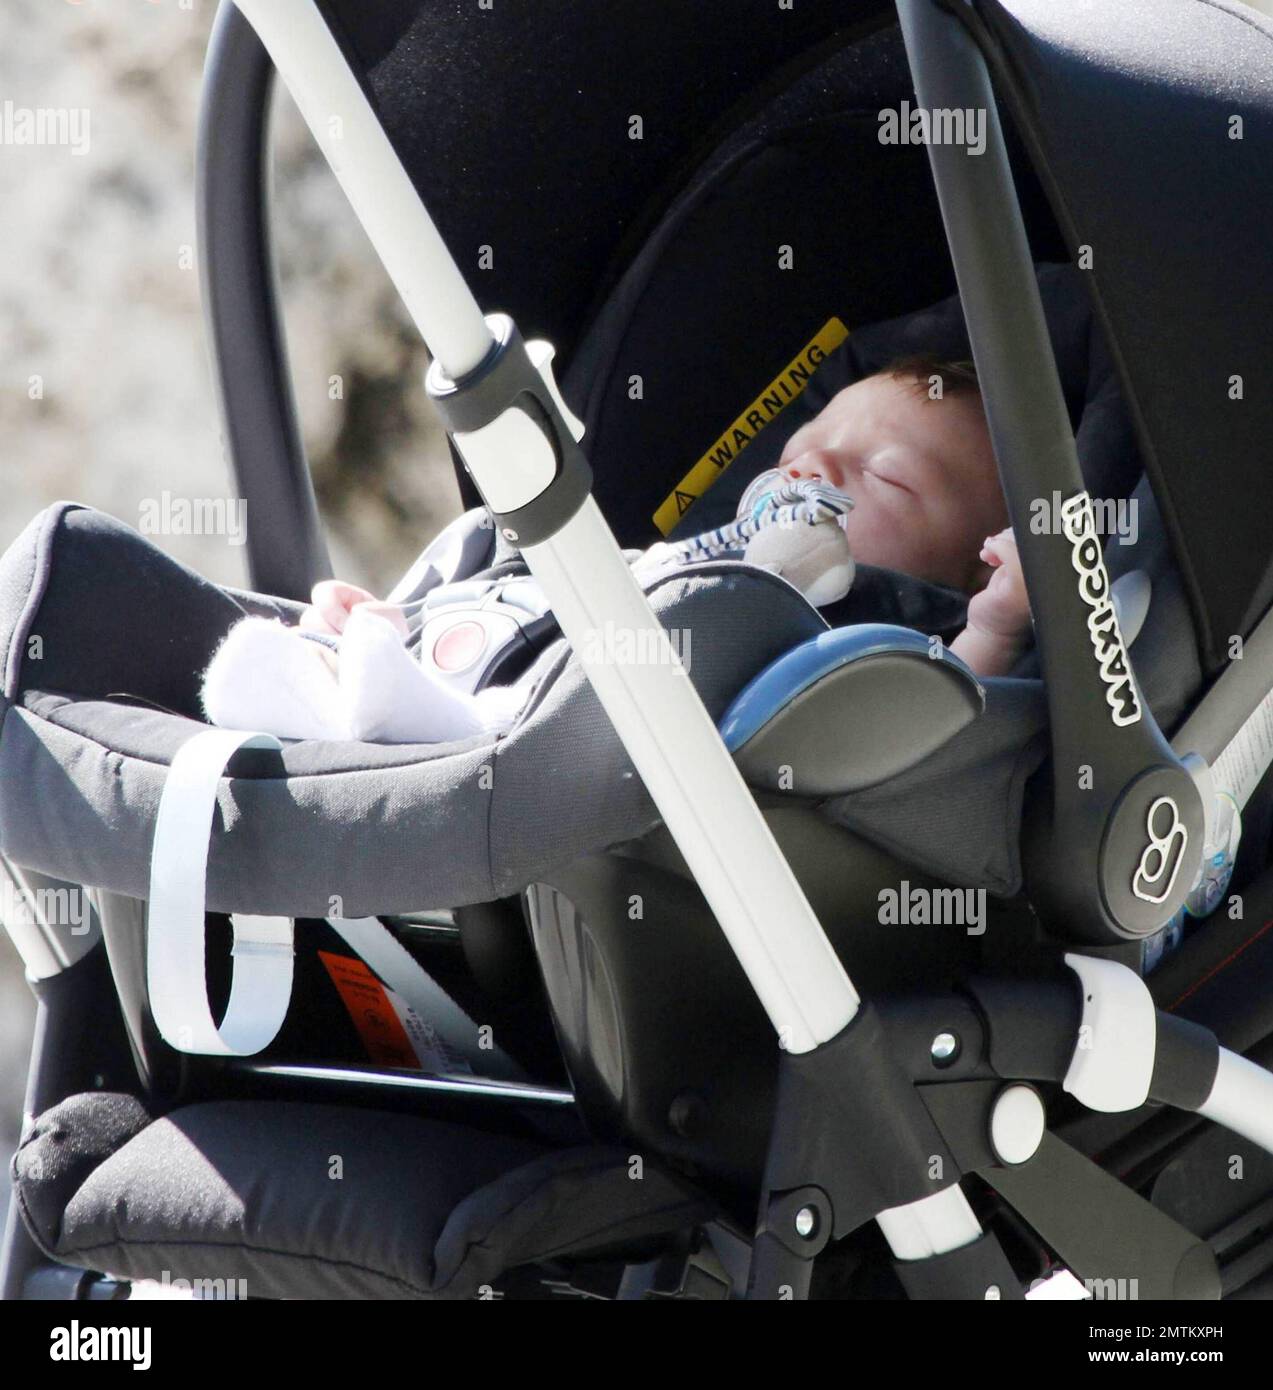 Tennis ace Boris Becker walks along Miami Beach boardwalk with wife  Sharlely and new-born baby son Amadeus in a stroller shielded from the sun.  Sharlely is still showing some baby weight after